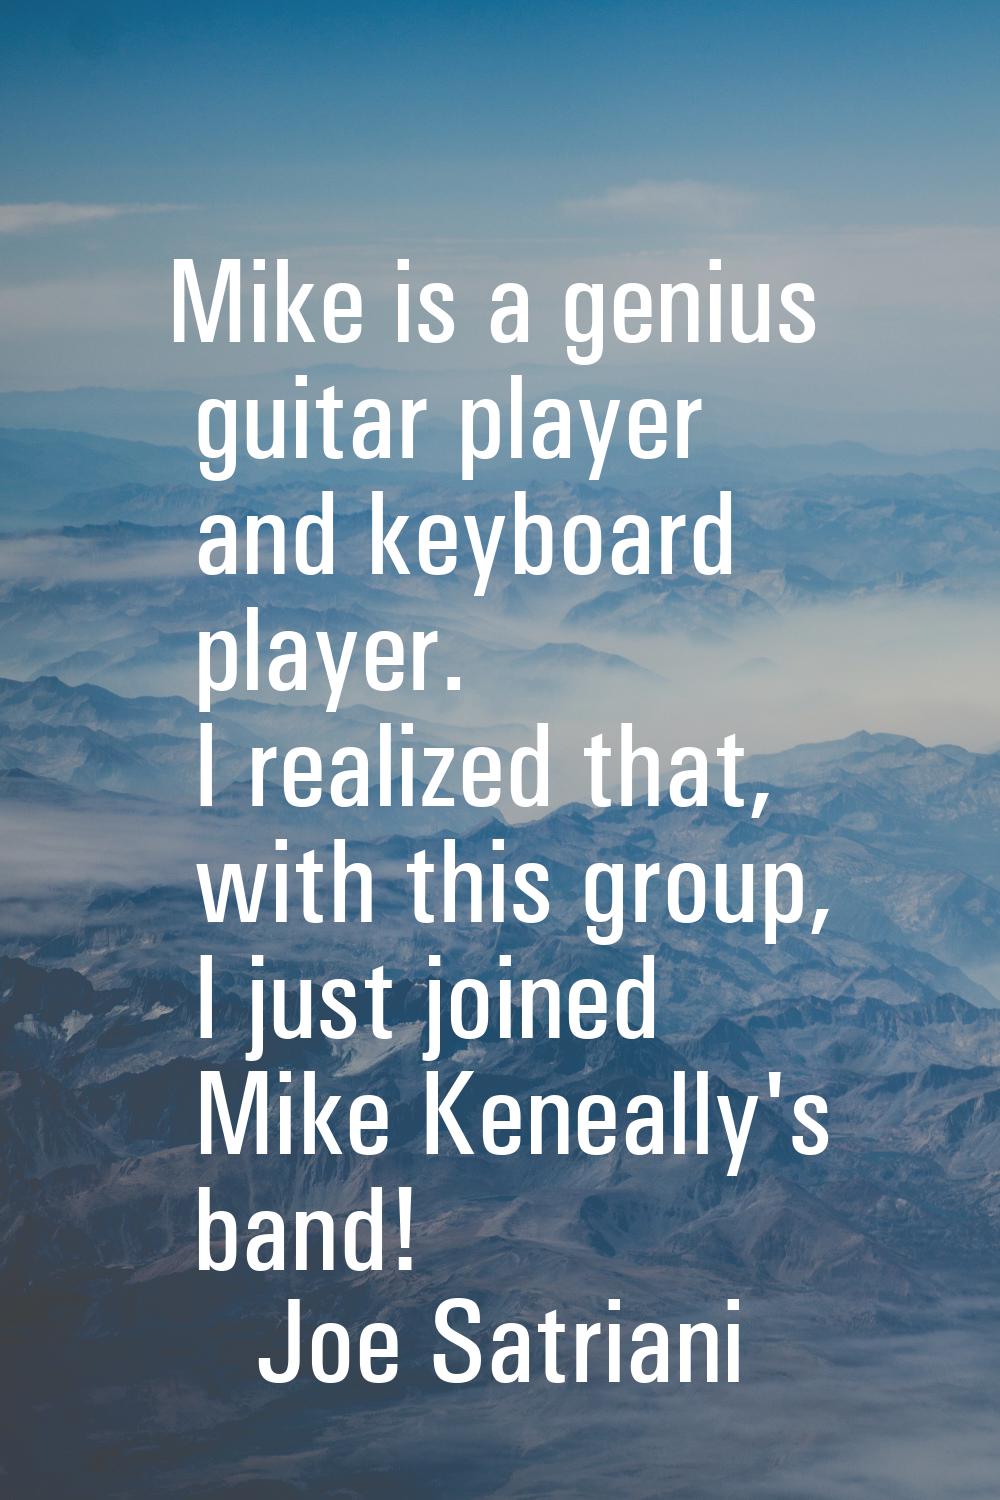 Mike is a genius guitar player and keyboard player. I realized that, with this group, I just joined